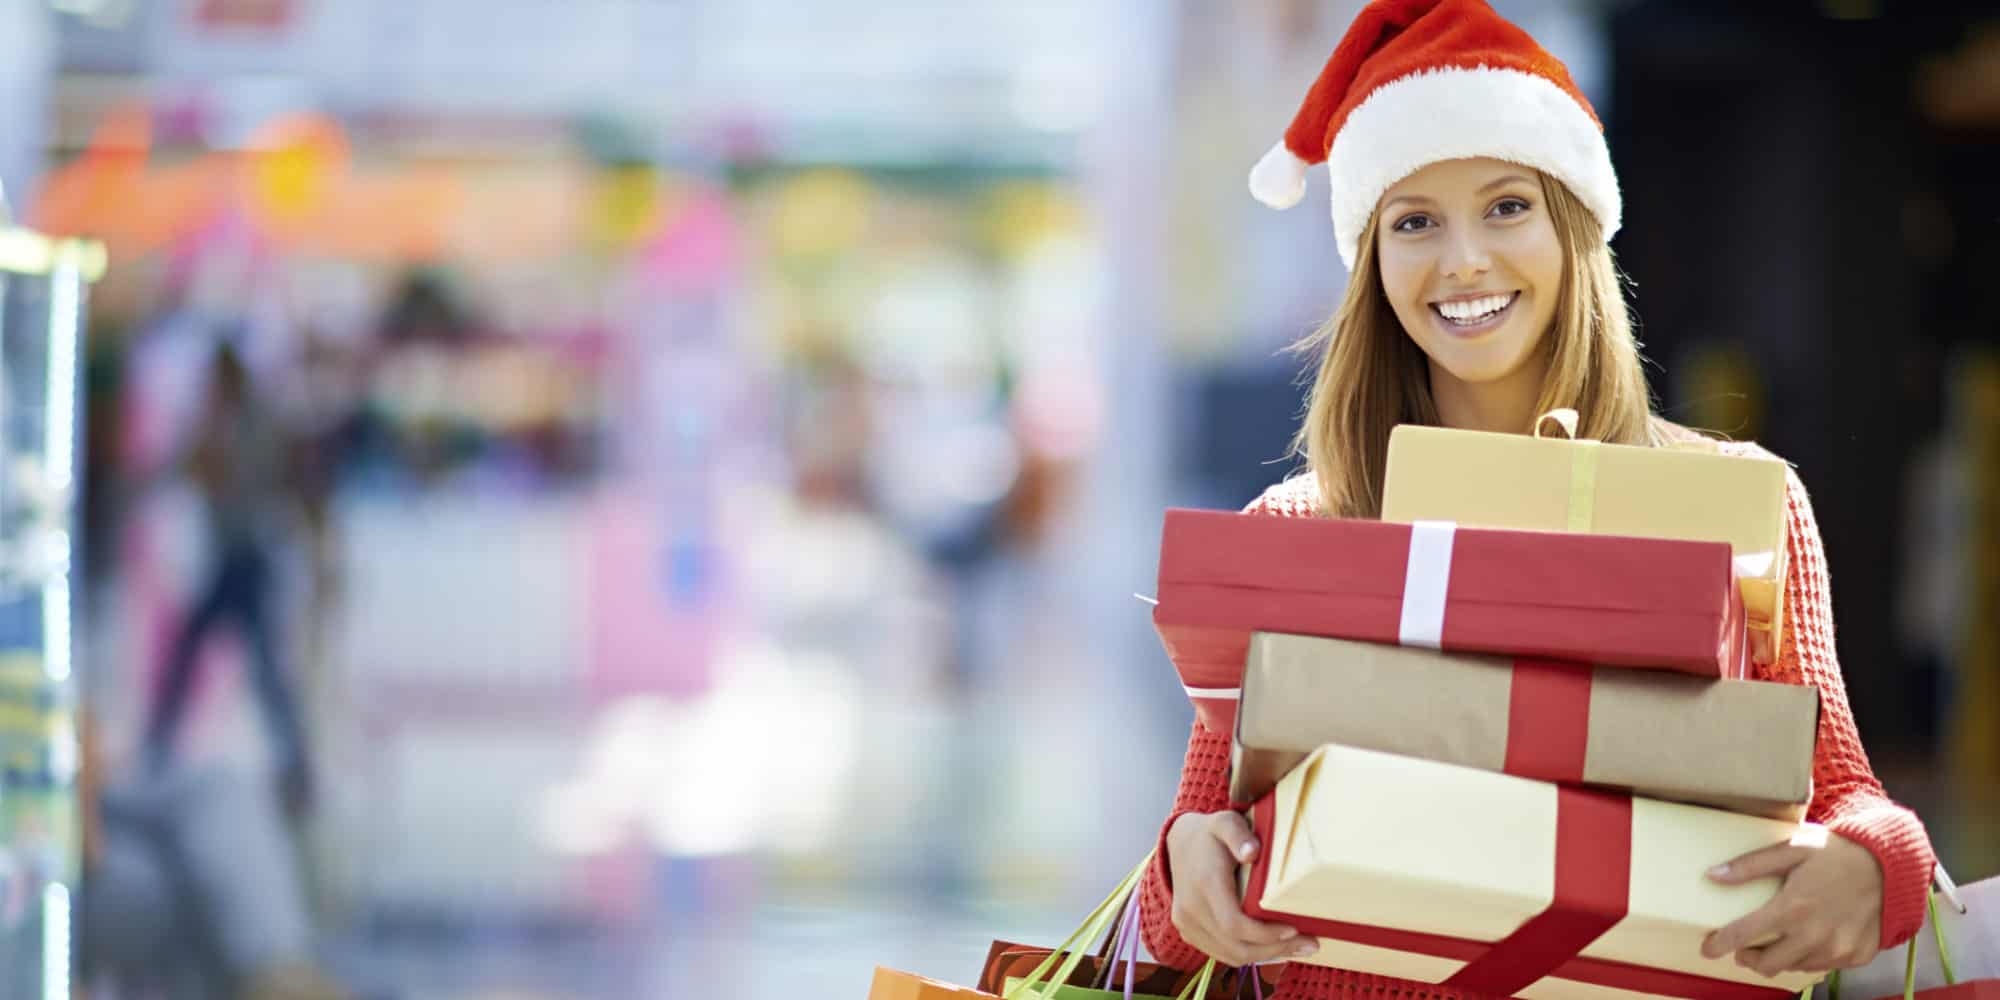 Online revenues fall week-on-week as tighter Covid restrictions impact Christmas commerce